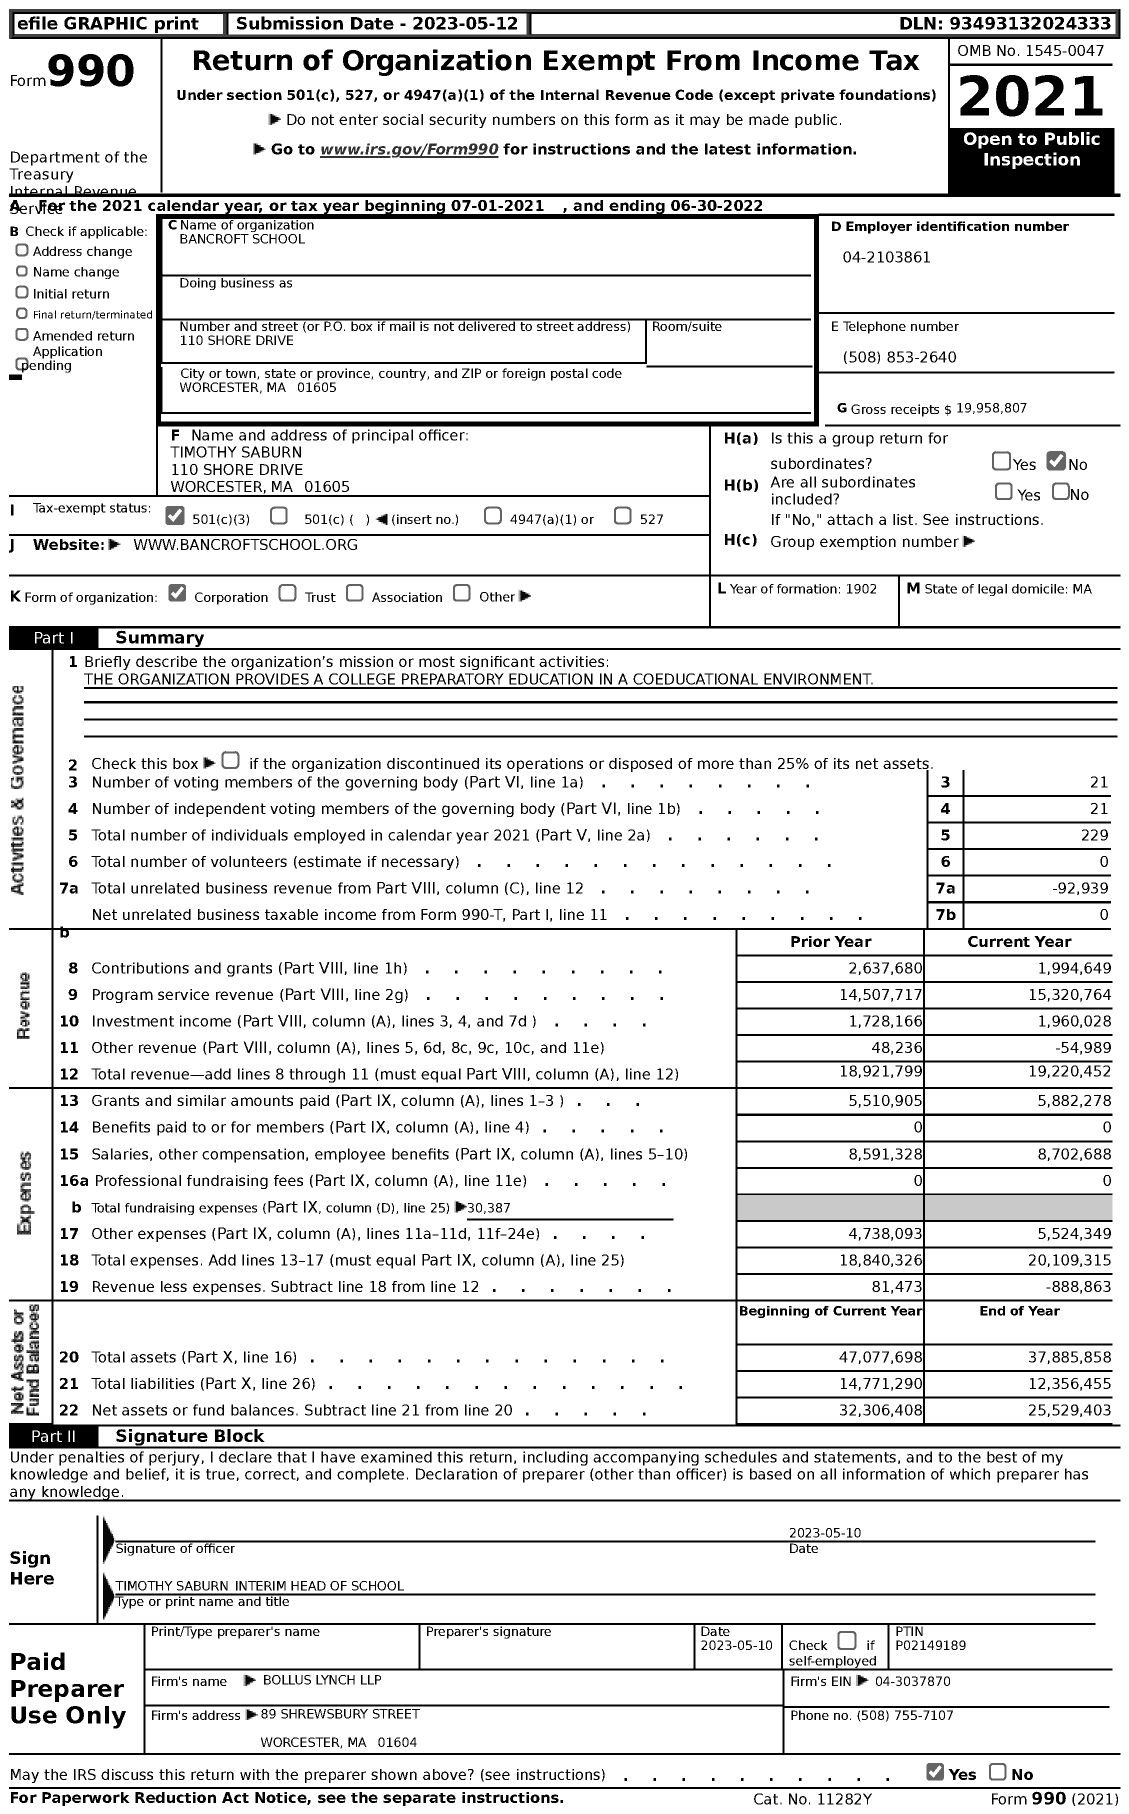 Image of first page of 2021 Form 990 for Bancroft School